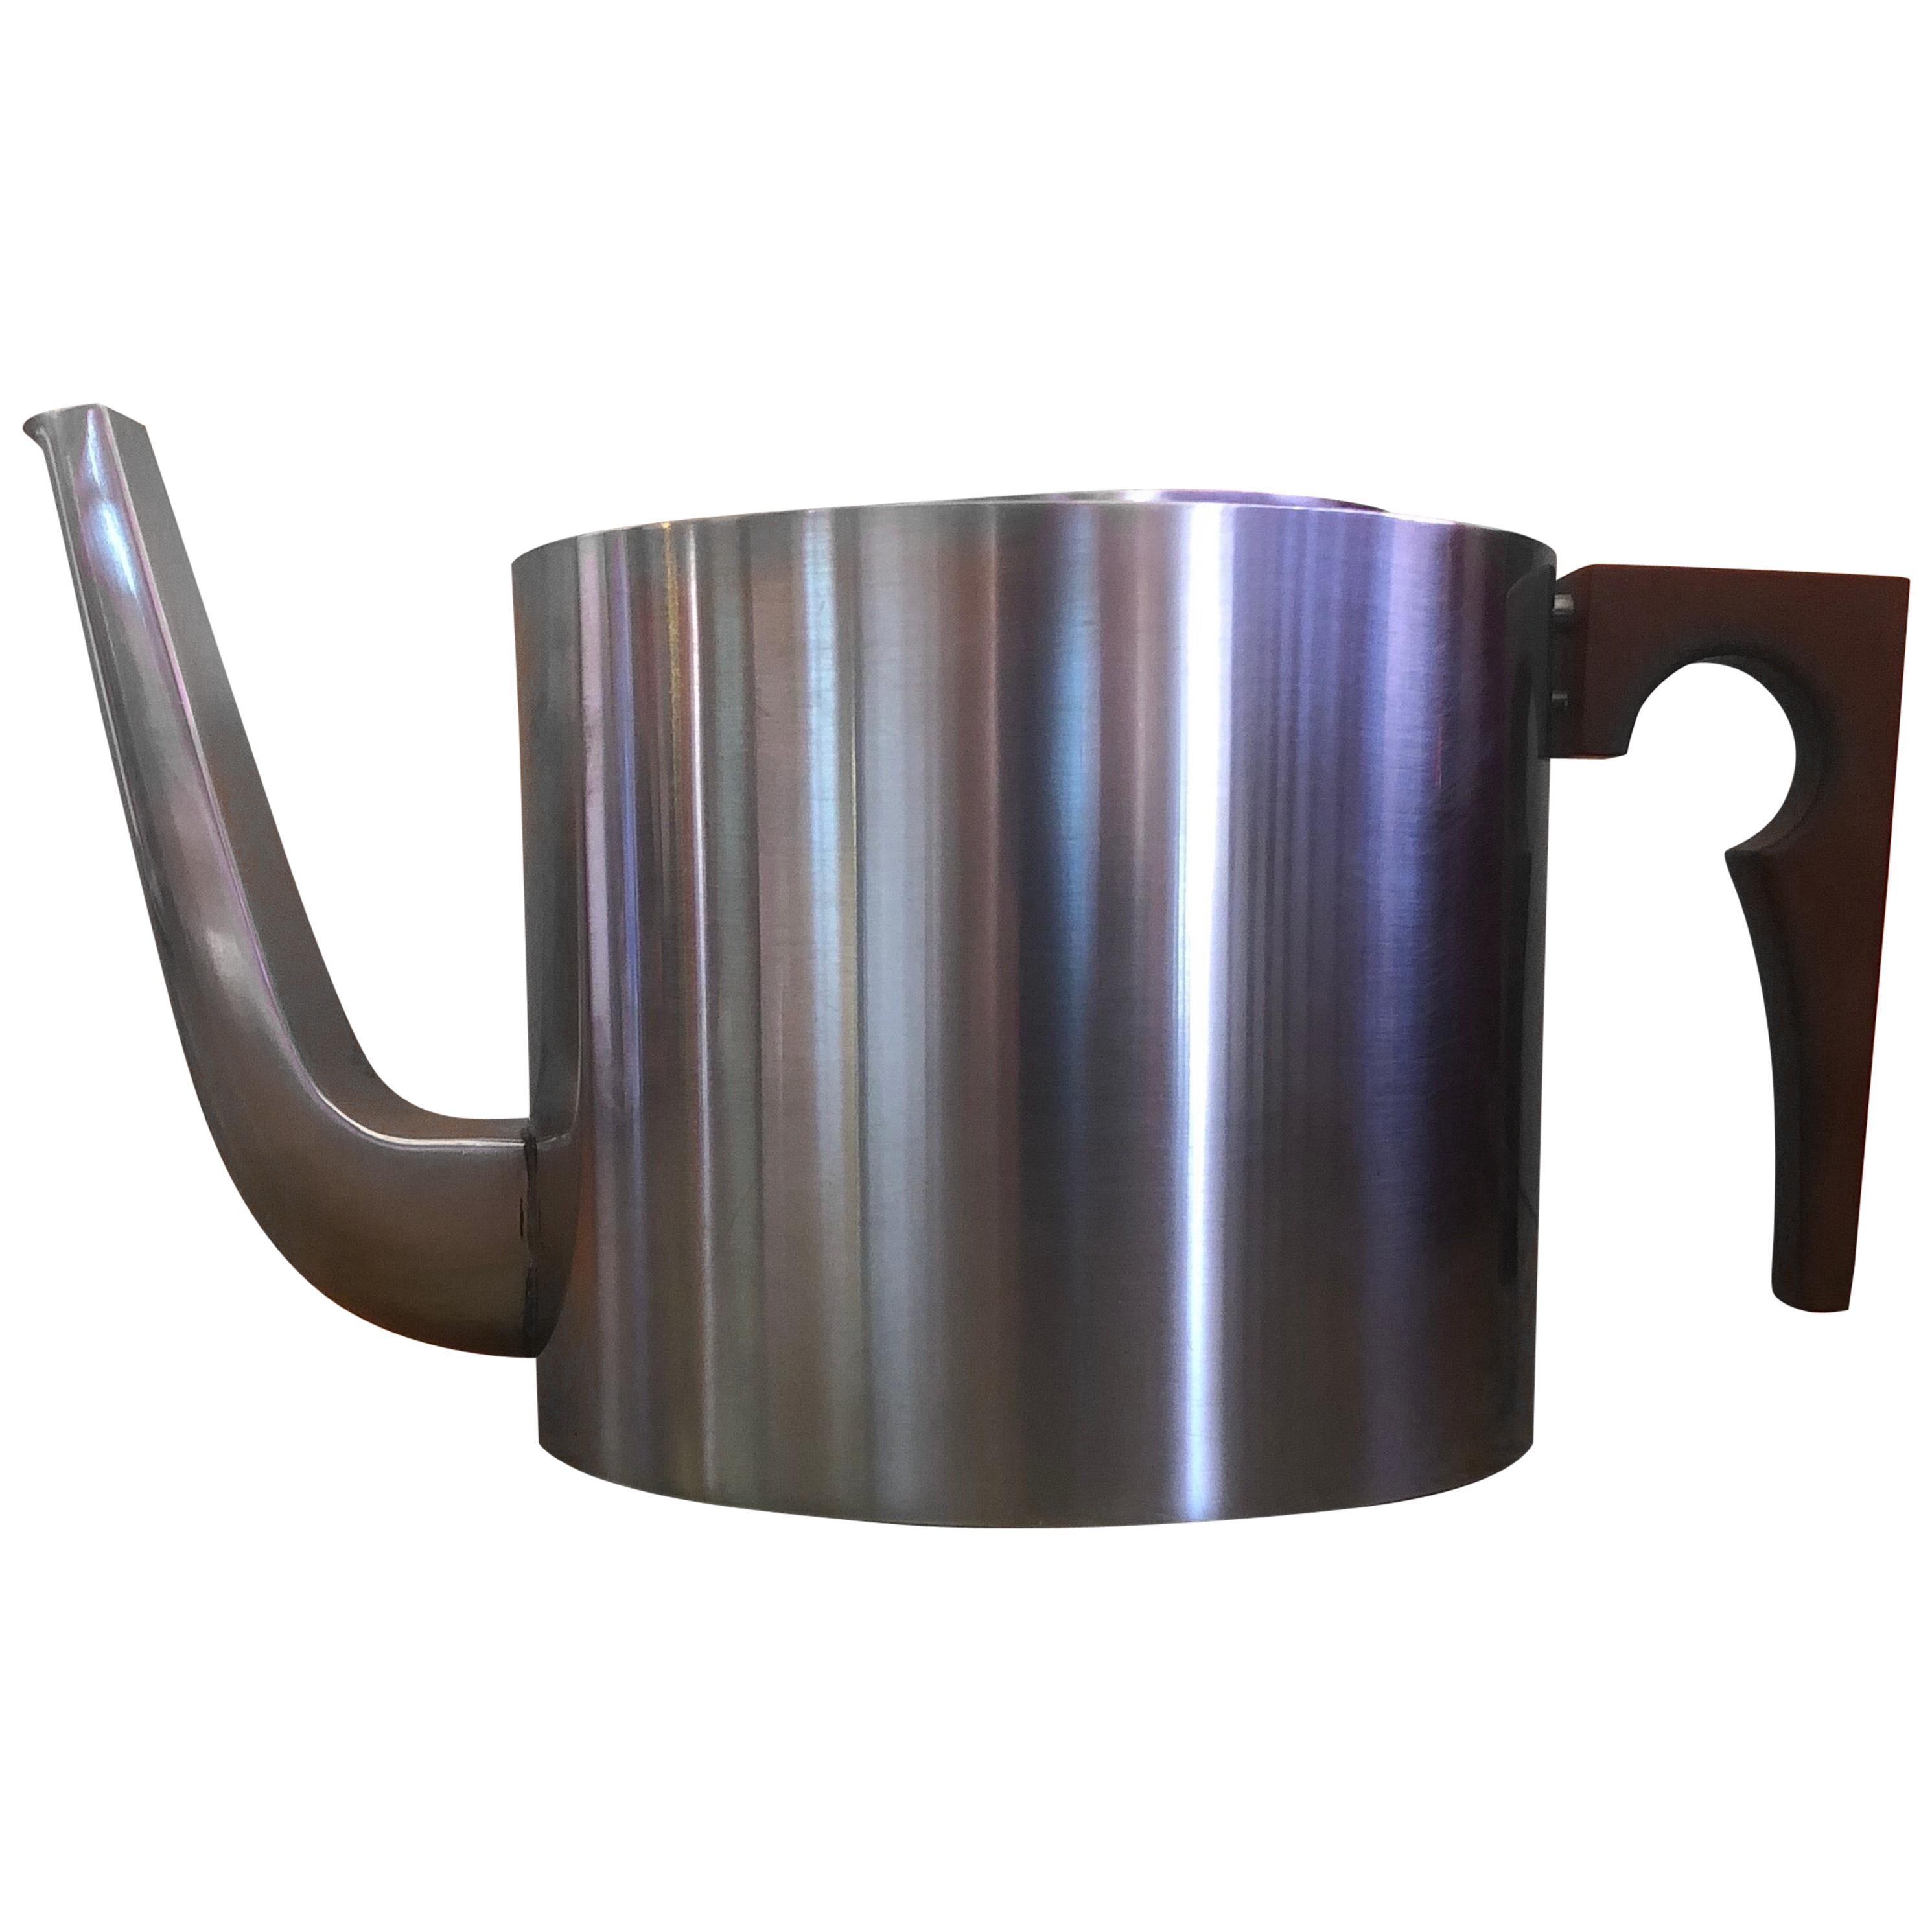 Midcentury Stainless Steel "Cylindia" Tea Pot by Arne Jacobsen for Lauffer